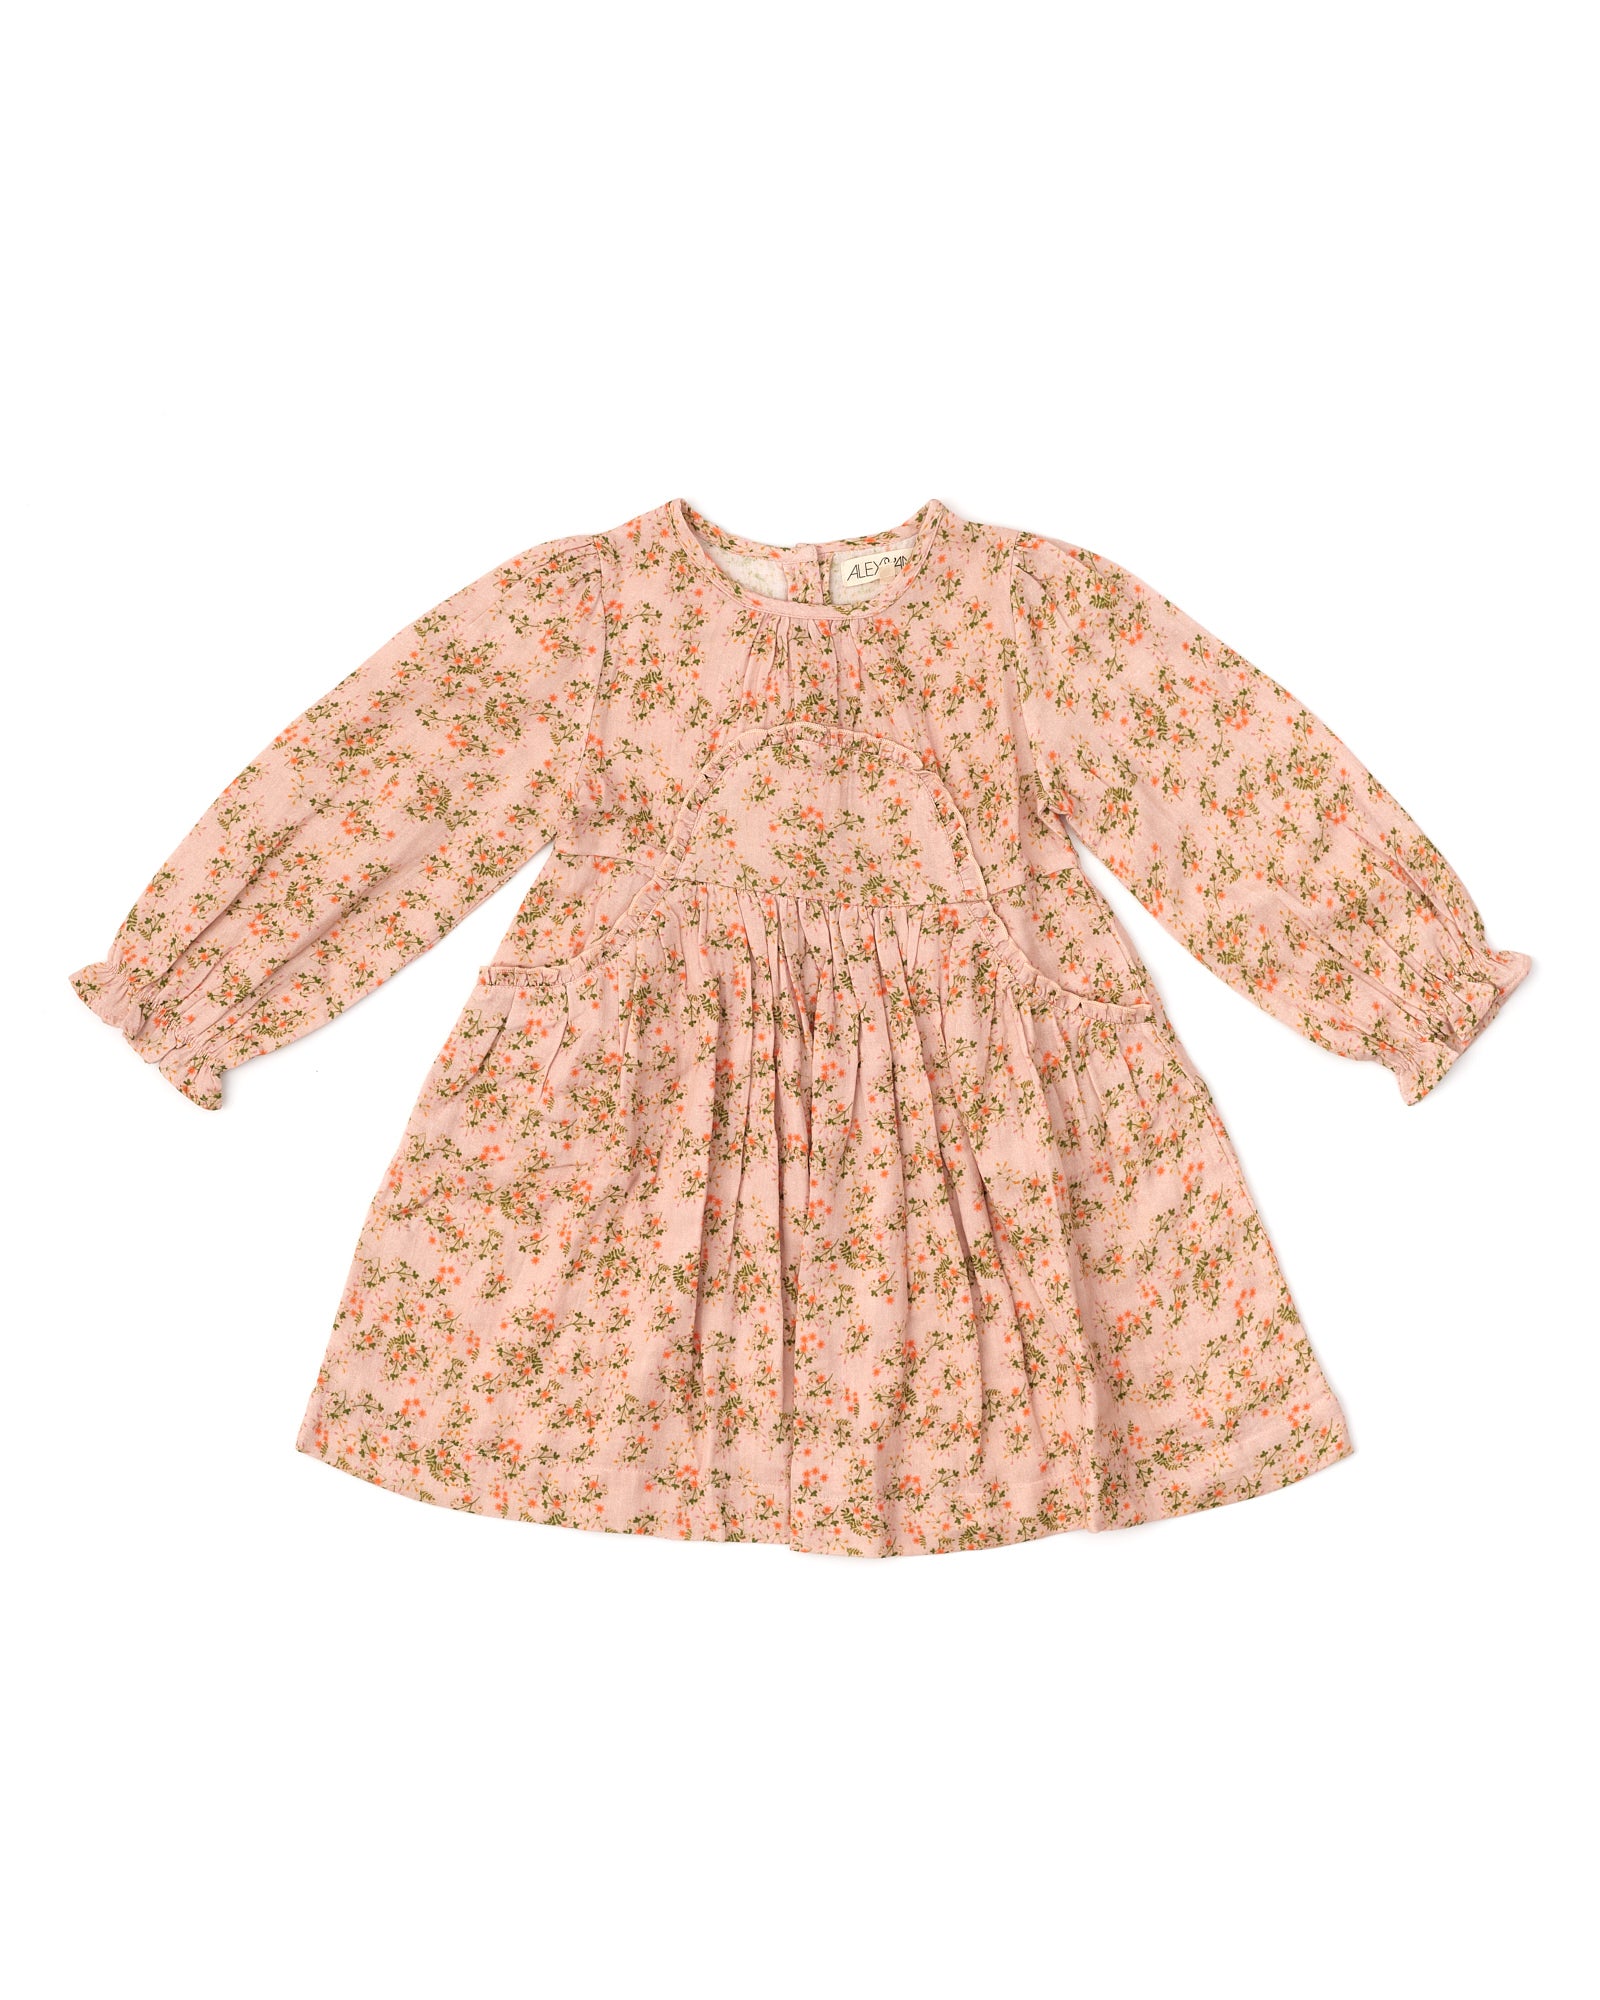 Mica Dress - Baby Blooms